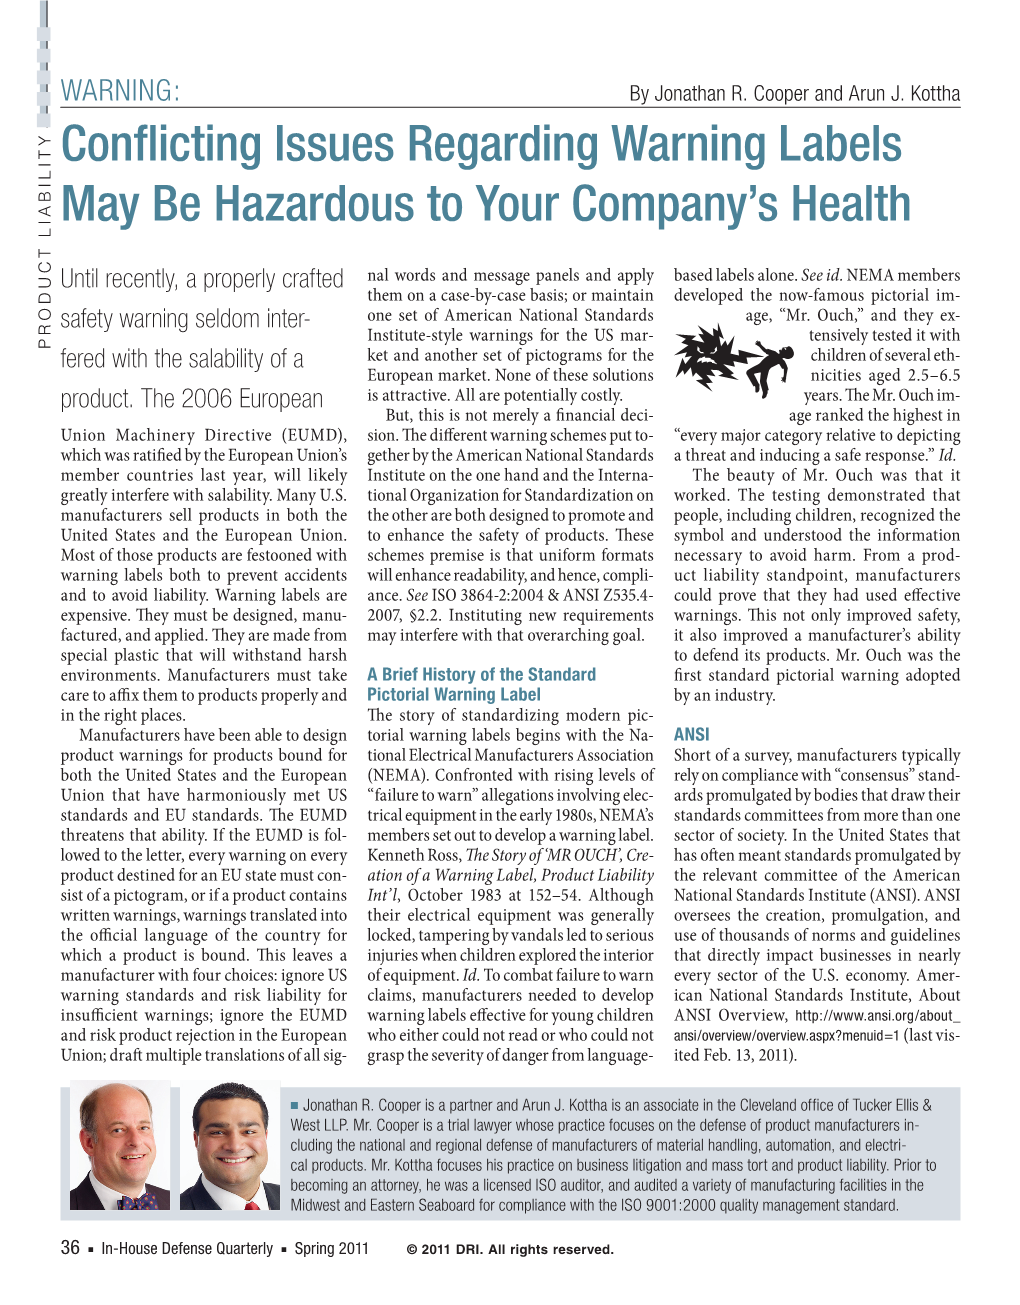 Conflicting Issues Regarding Warning Labels May Be Hazardous to Your Company's Health